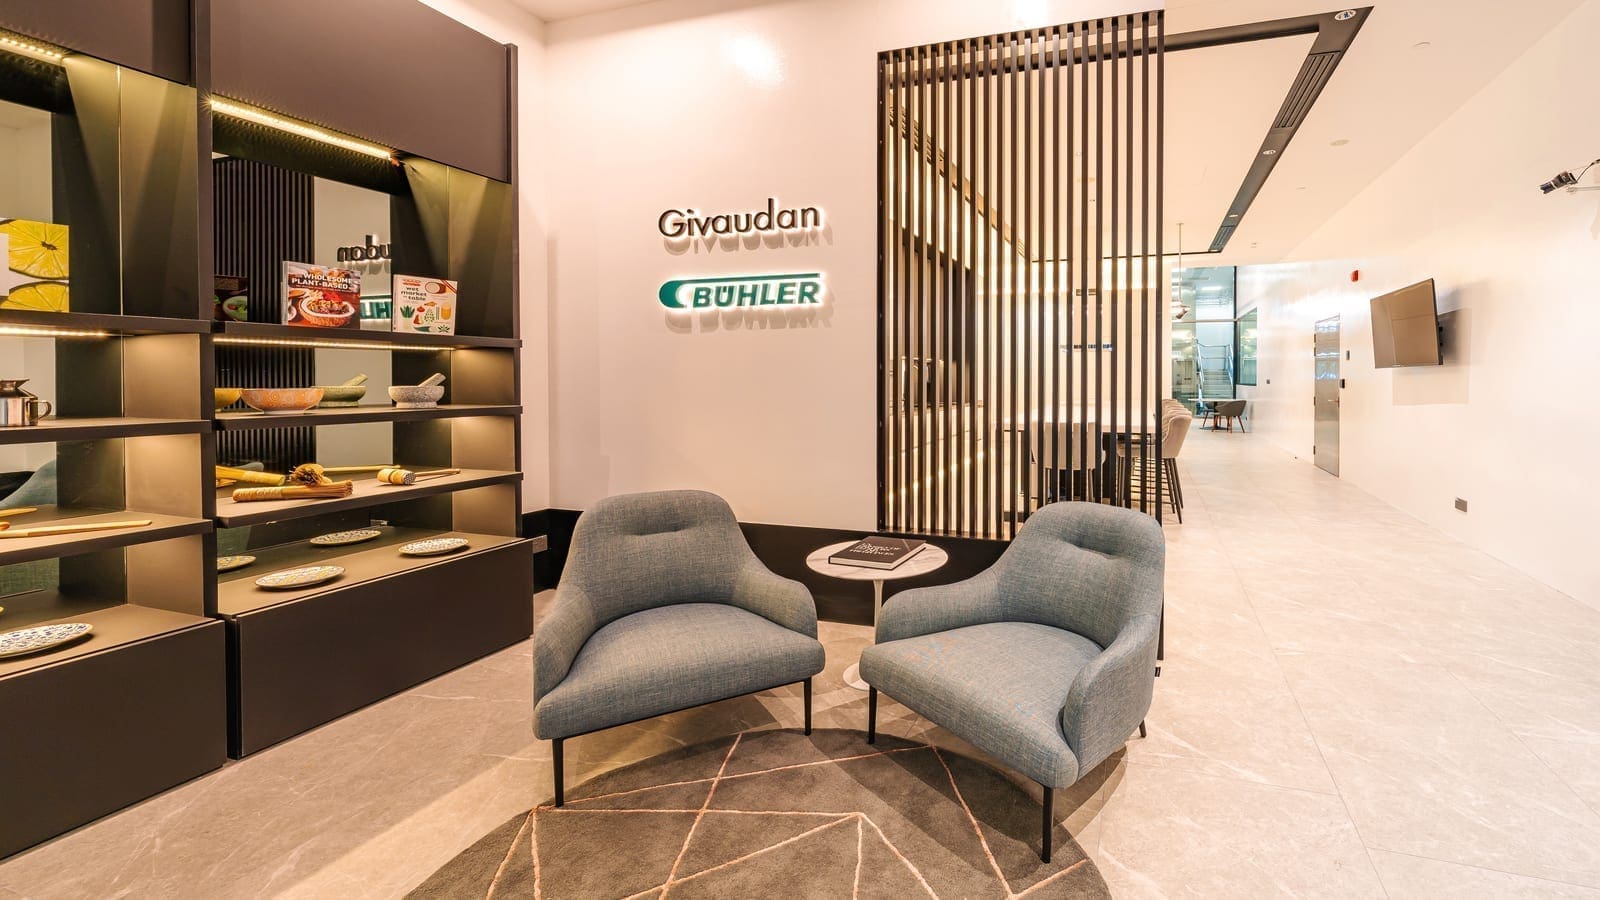 Givaudan, Bühler open new innovation center  in Singapore to support agile plant-based product development